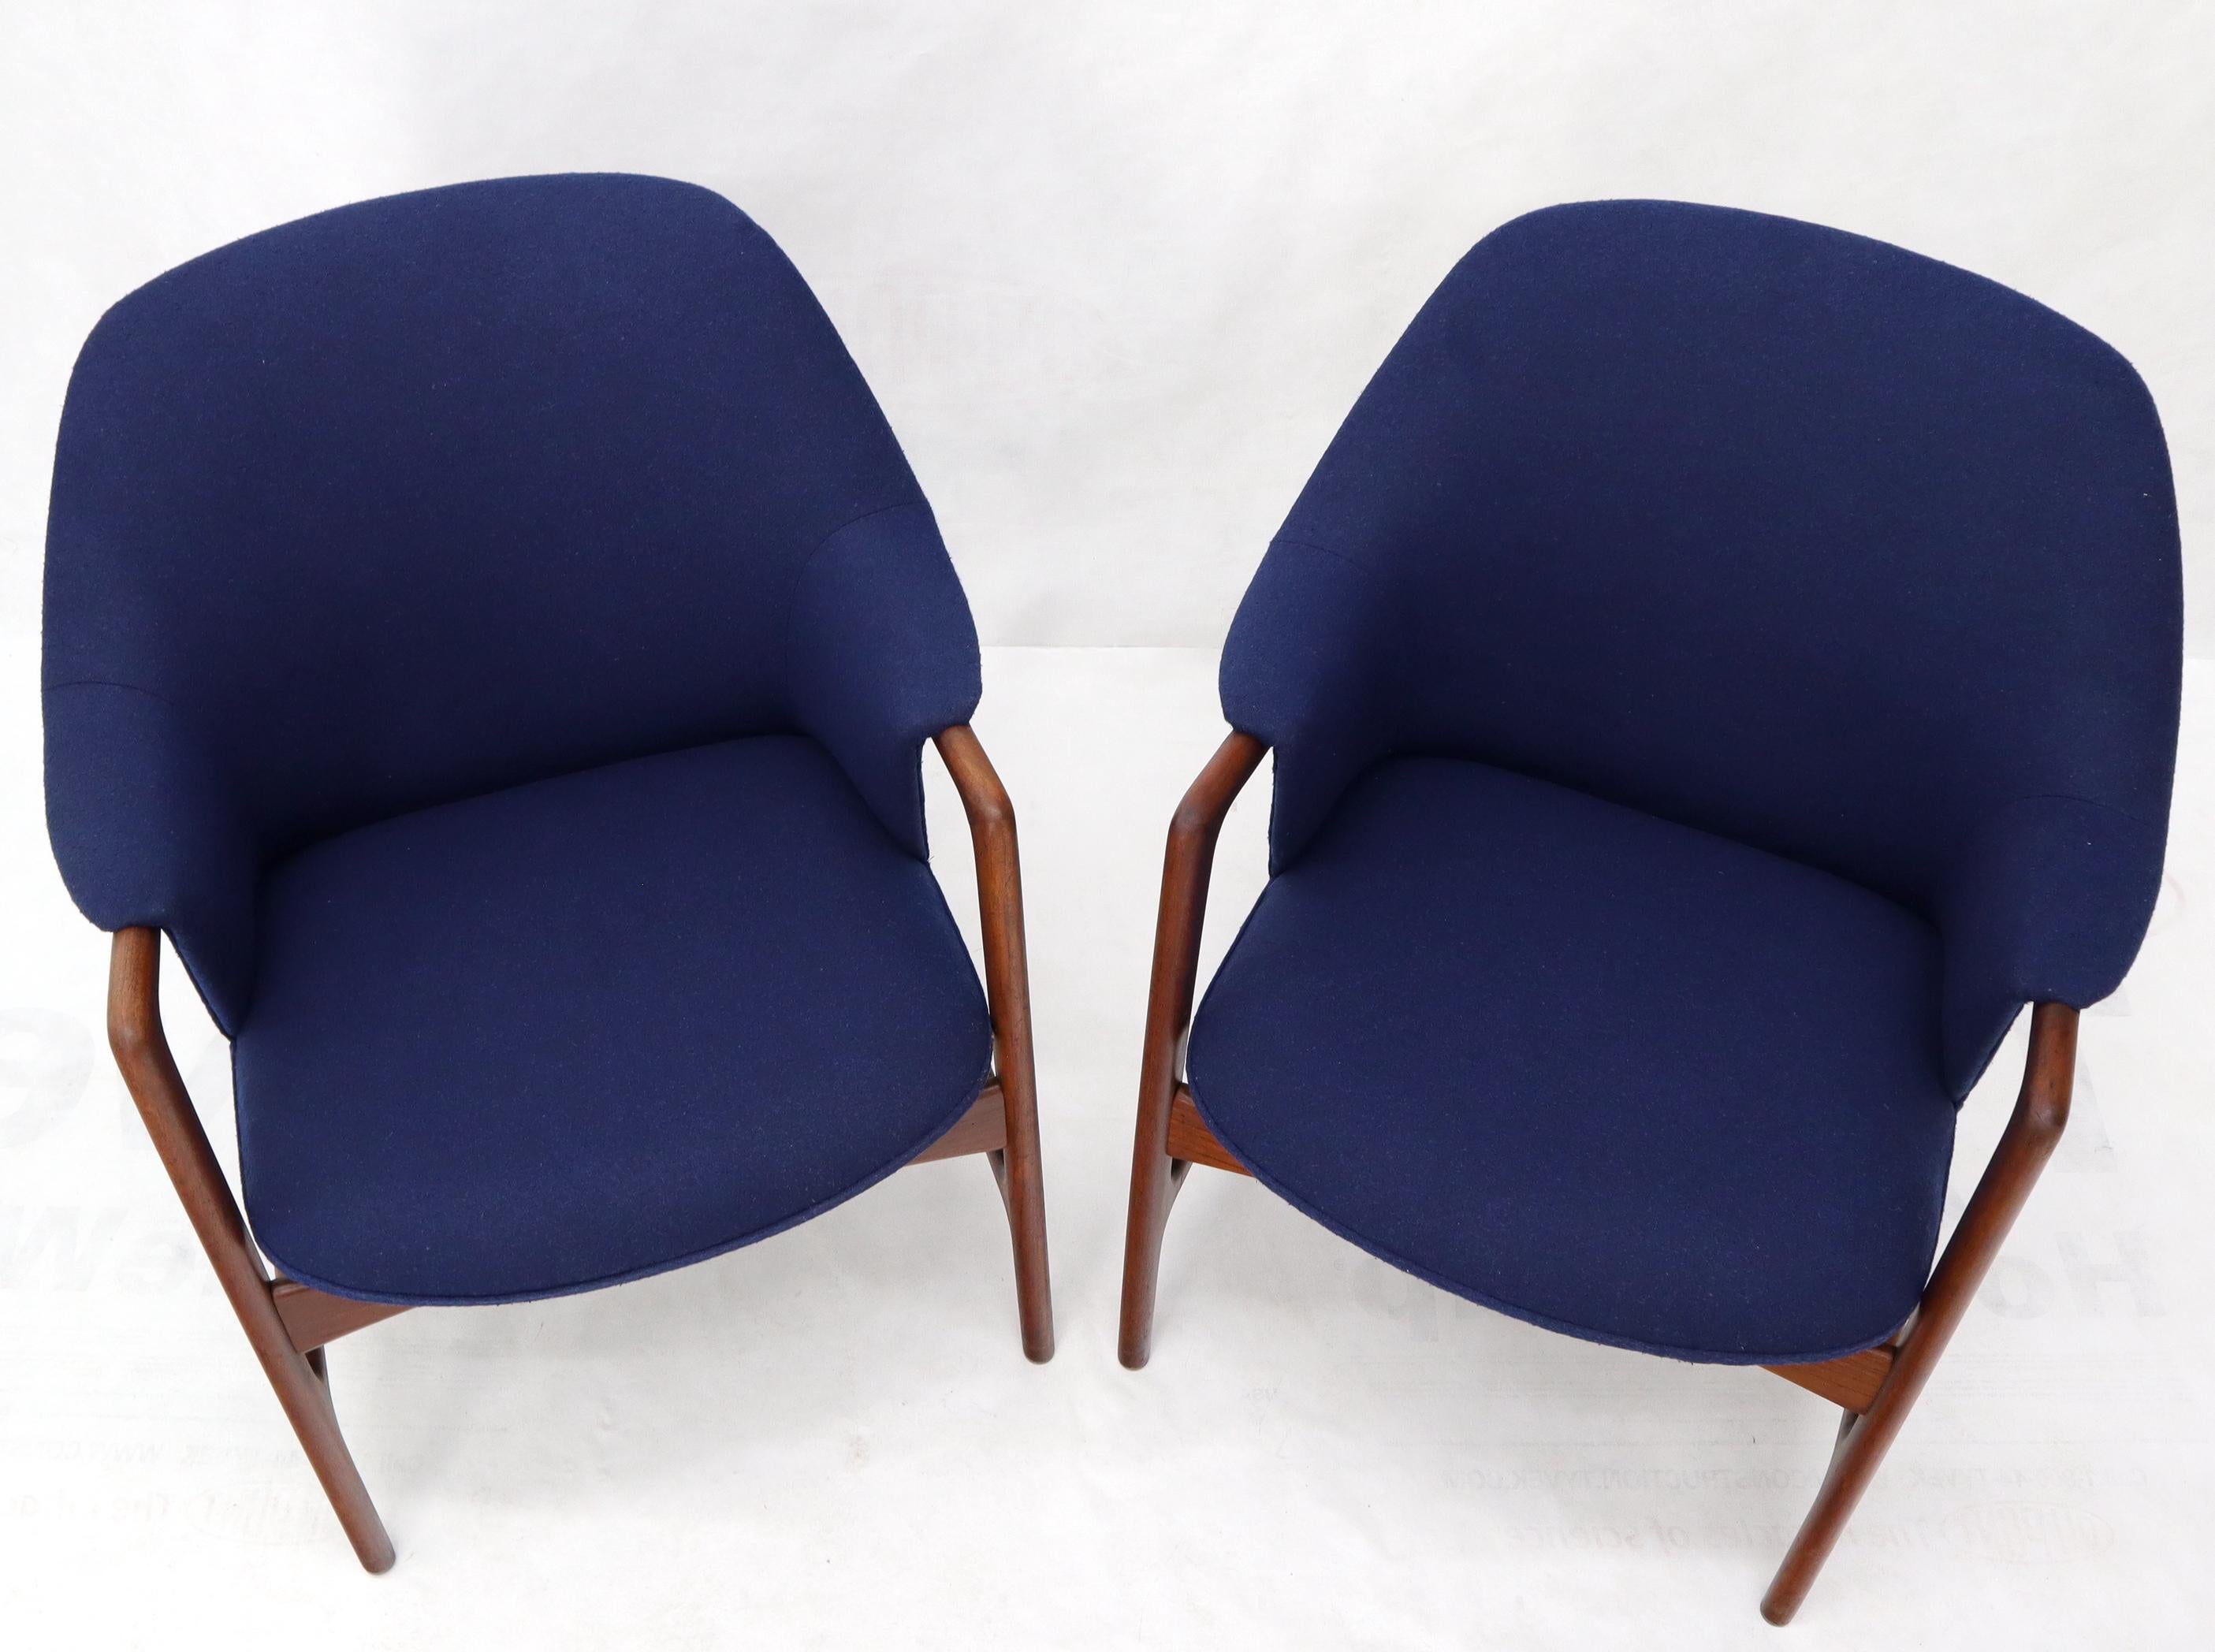 New Blue Wool Upholstery Teak Frames Danish Mid-Century Modern Lounge Chairs For Sale 2